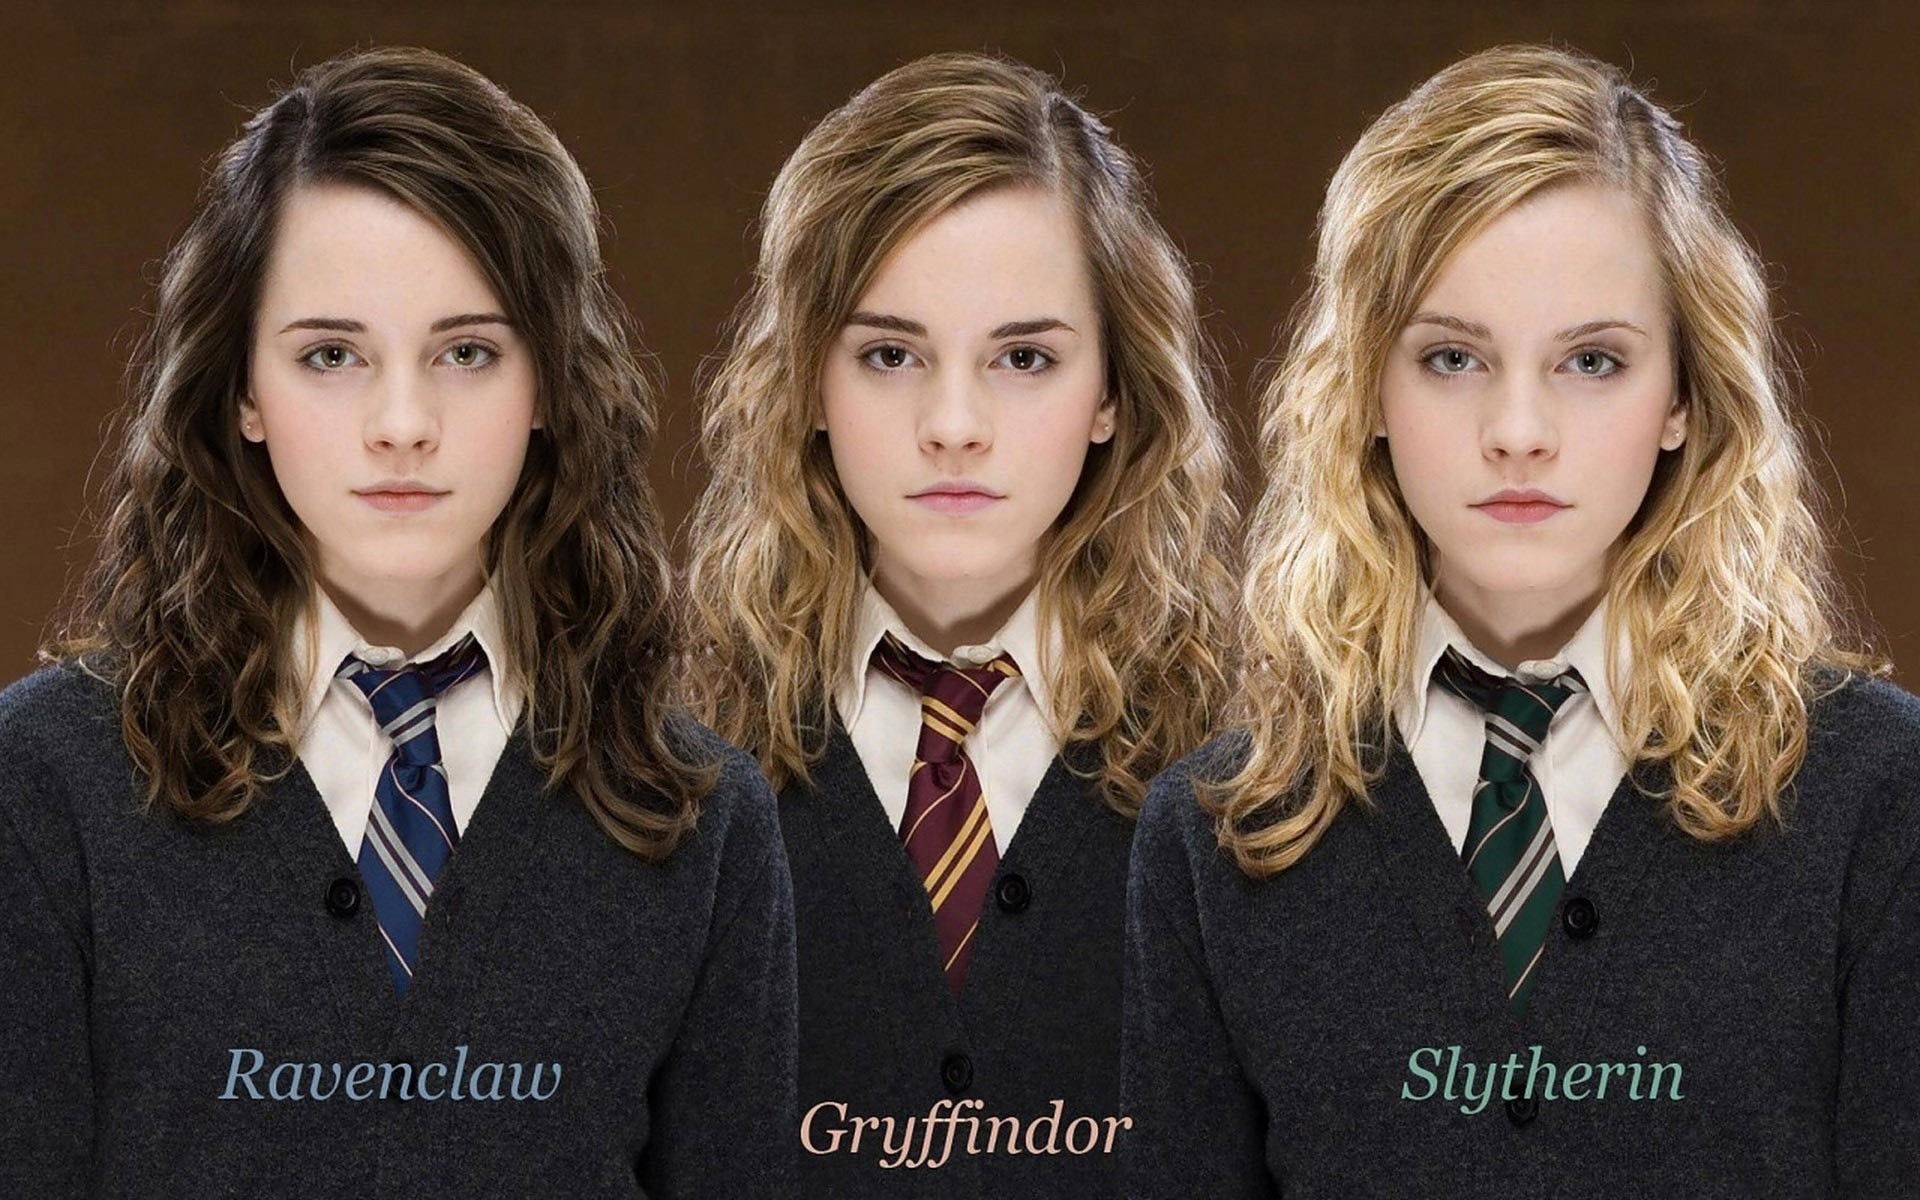 A group of girls wearing school uniforms - Slytherin